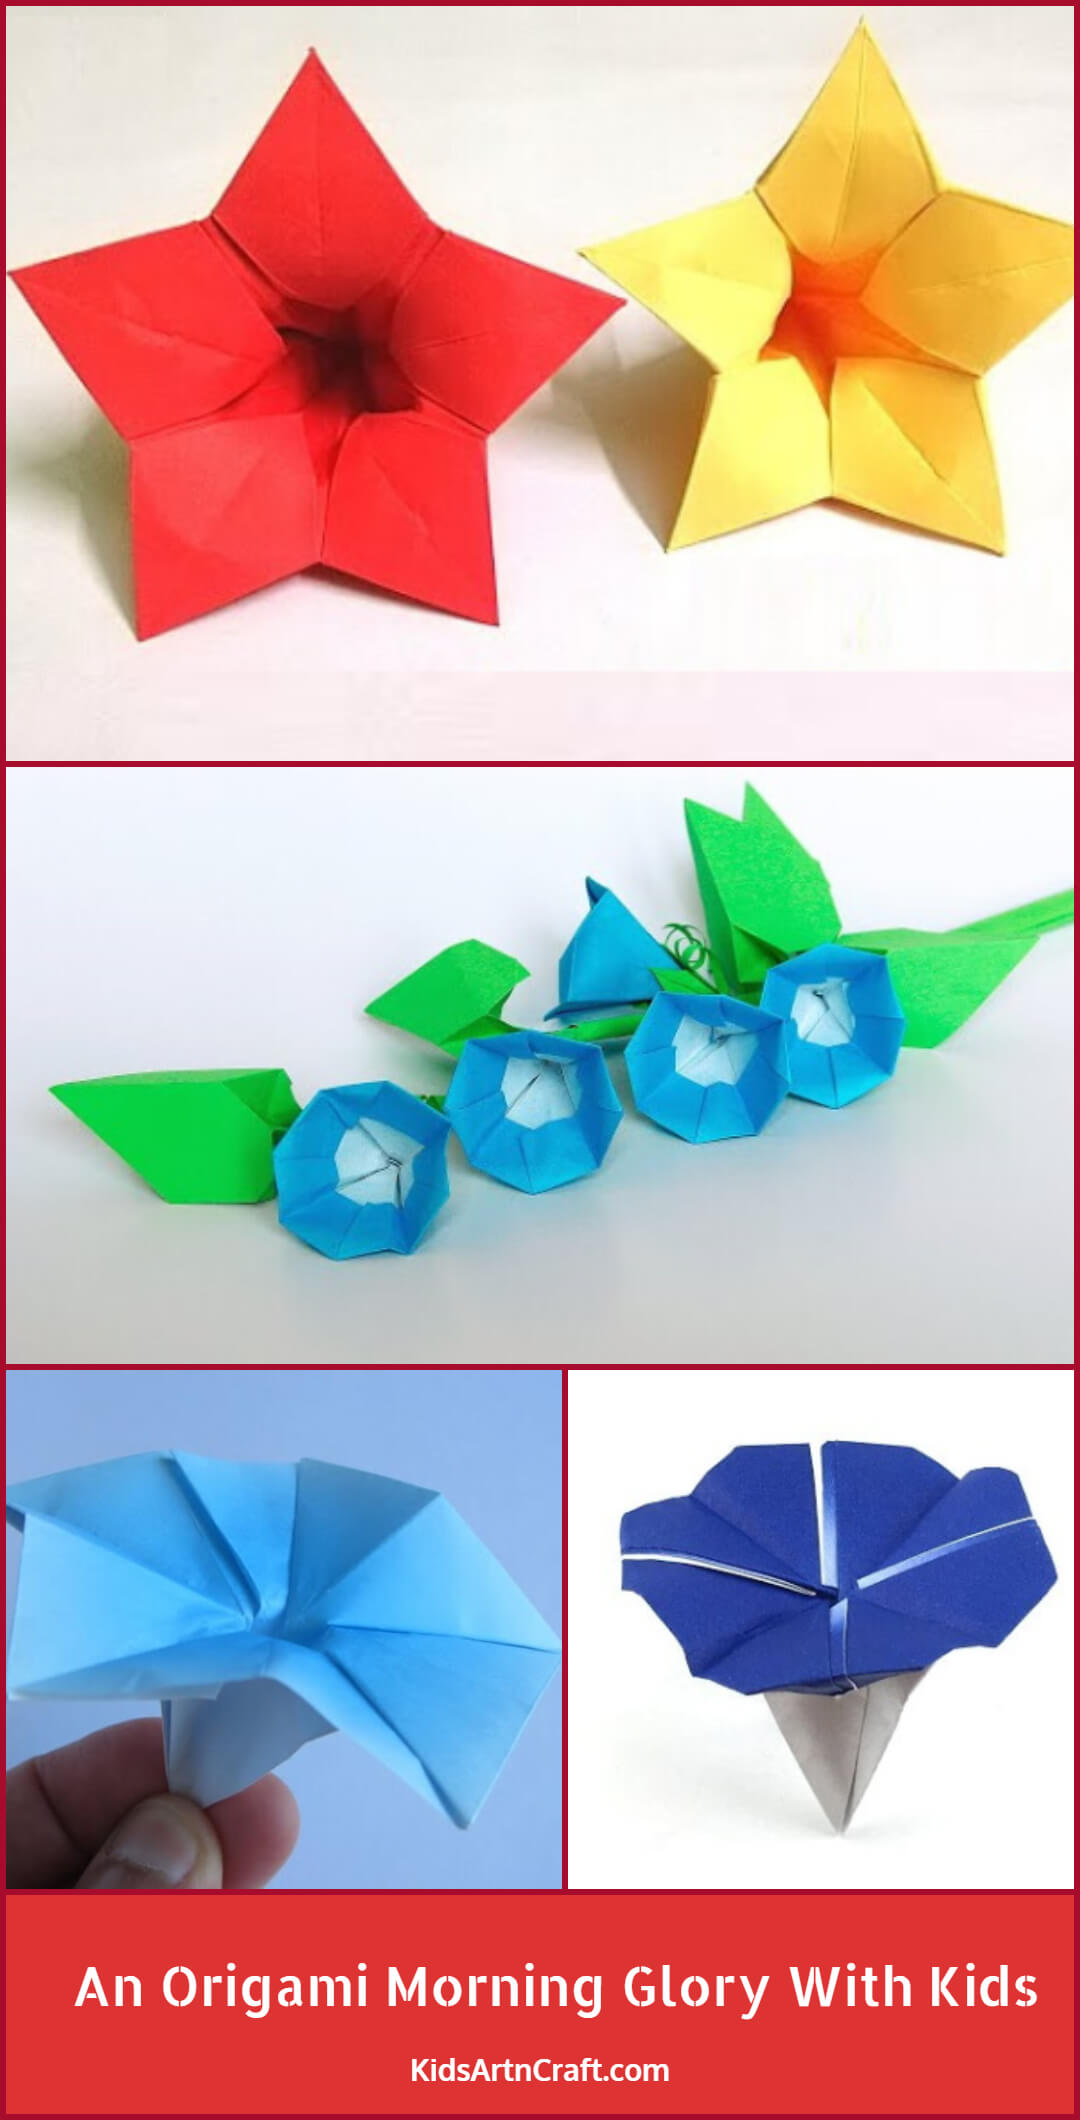 How To Make An Origami Morning Glory With Kids